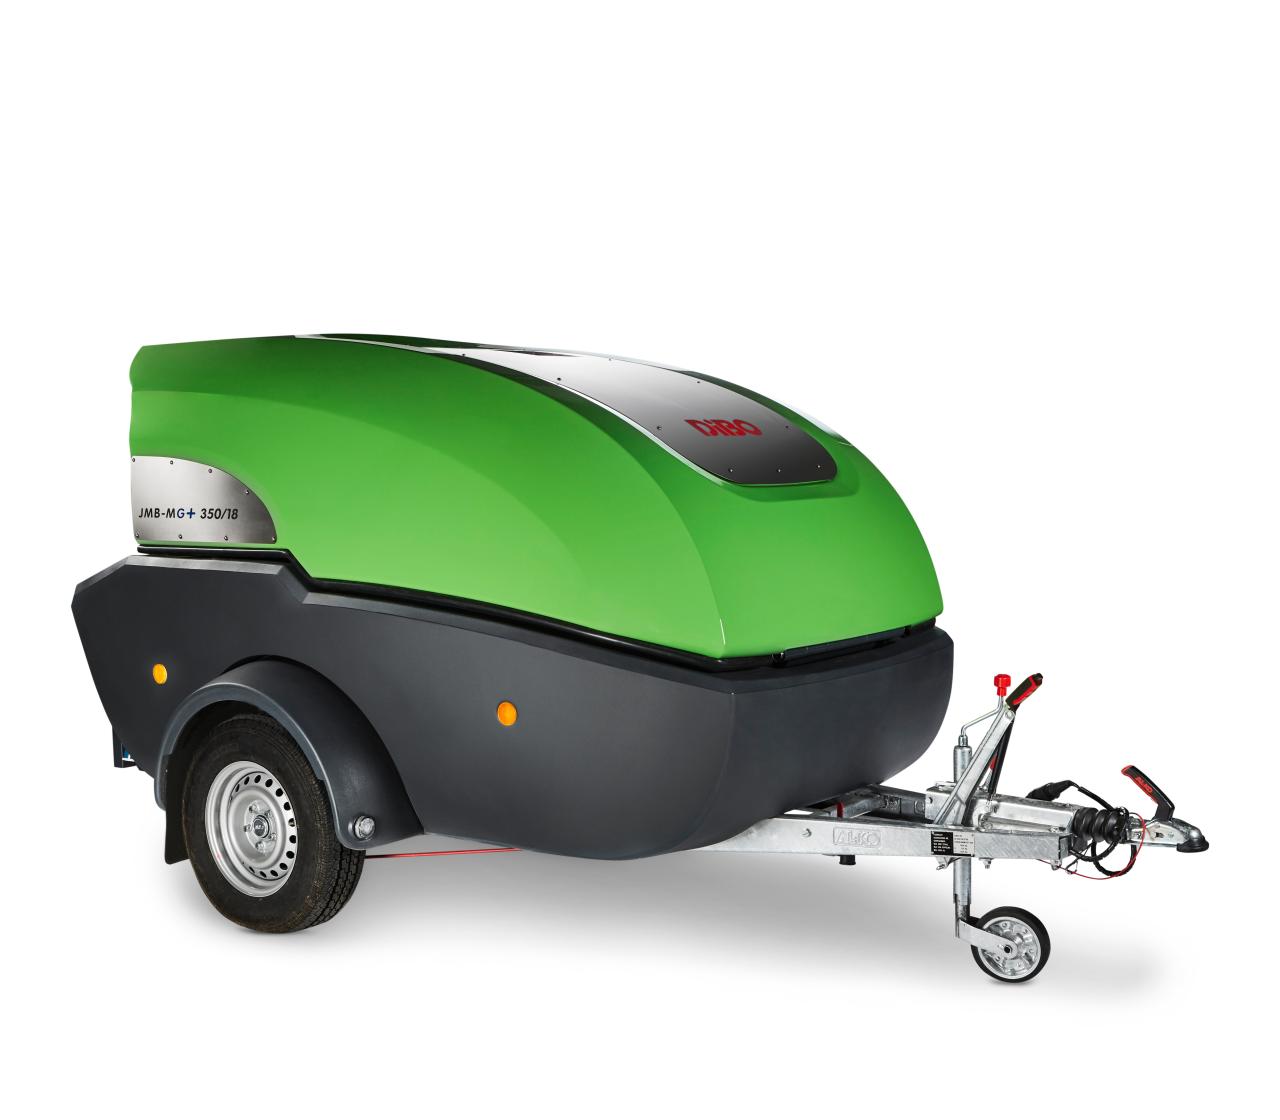 DiBO JMB-MG: Powerful high pressure trailer running entirely on CNG-gas